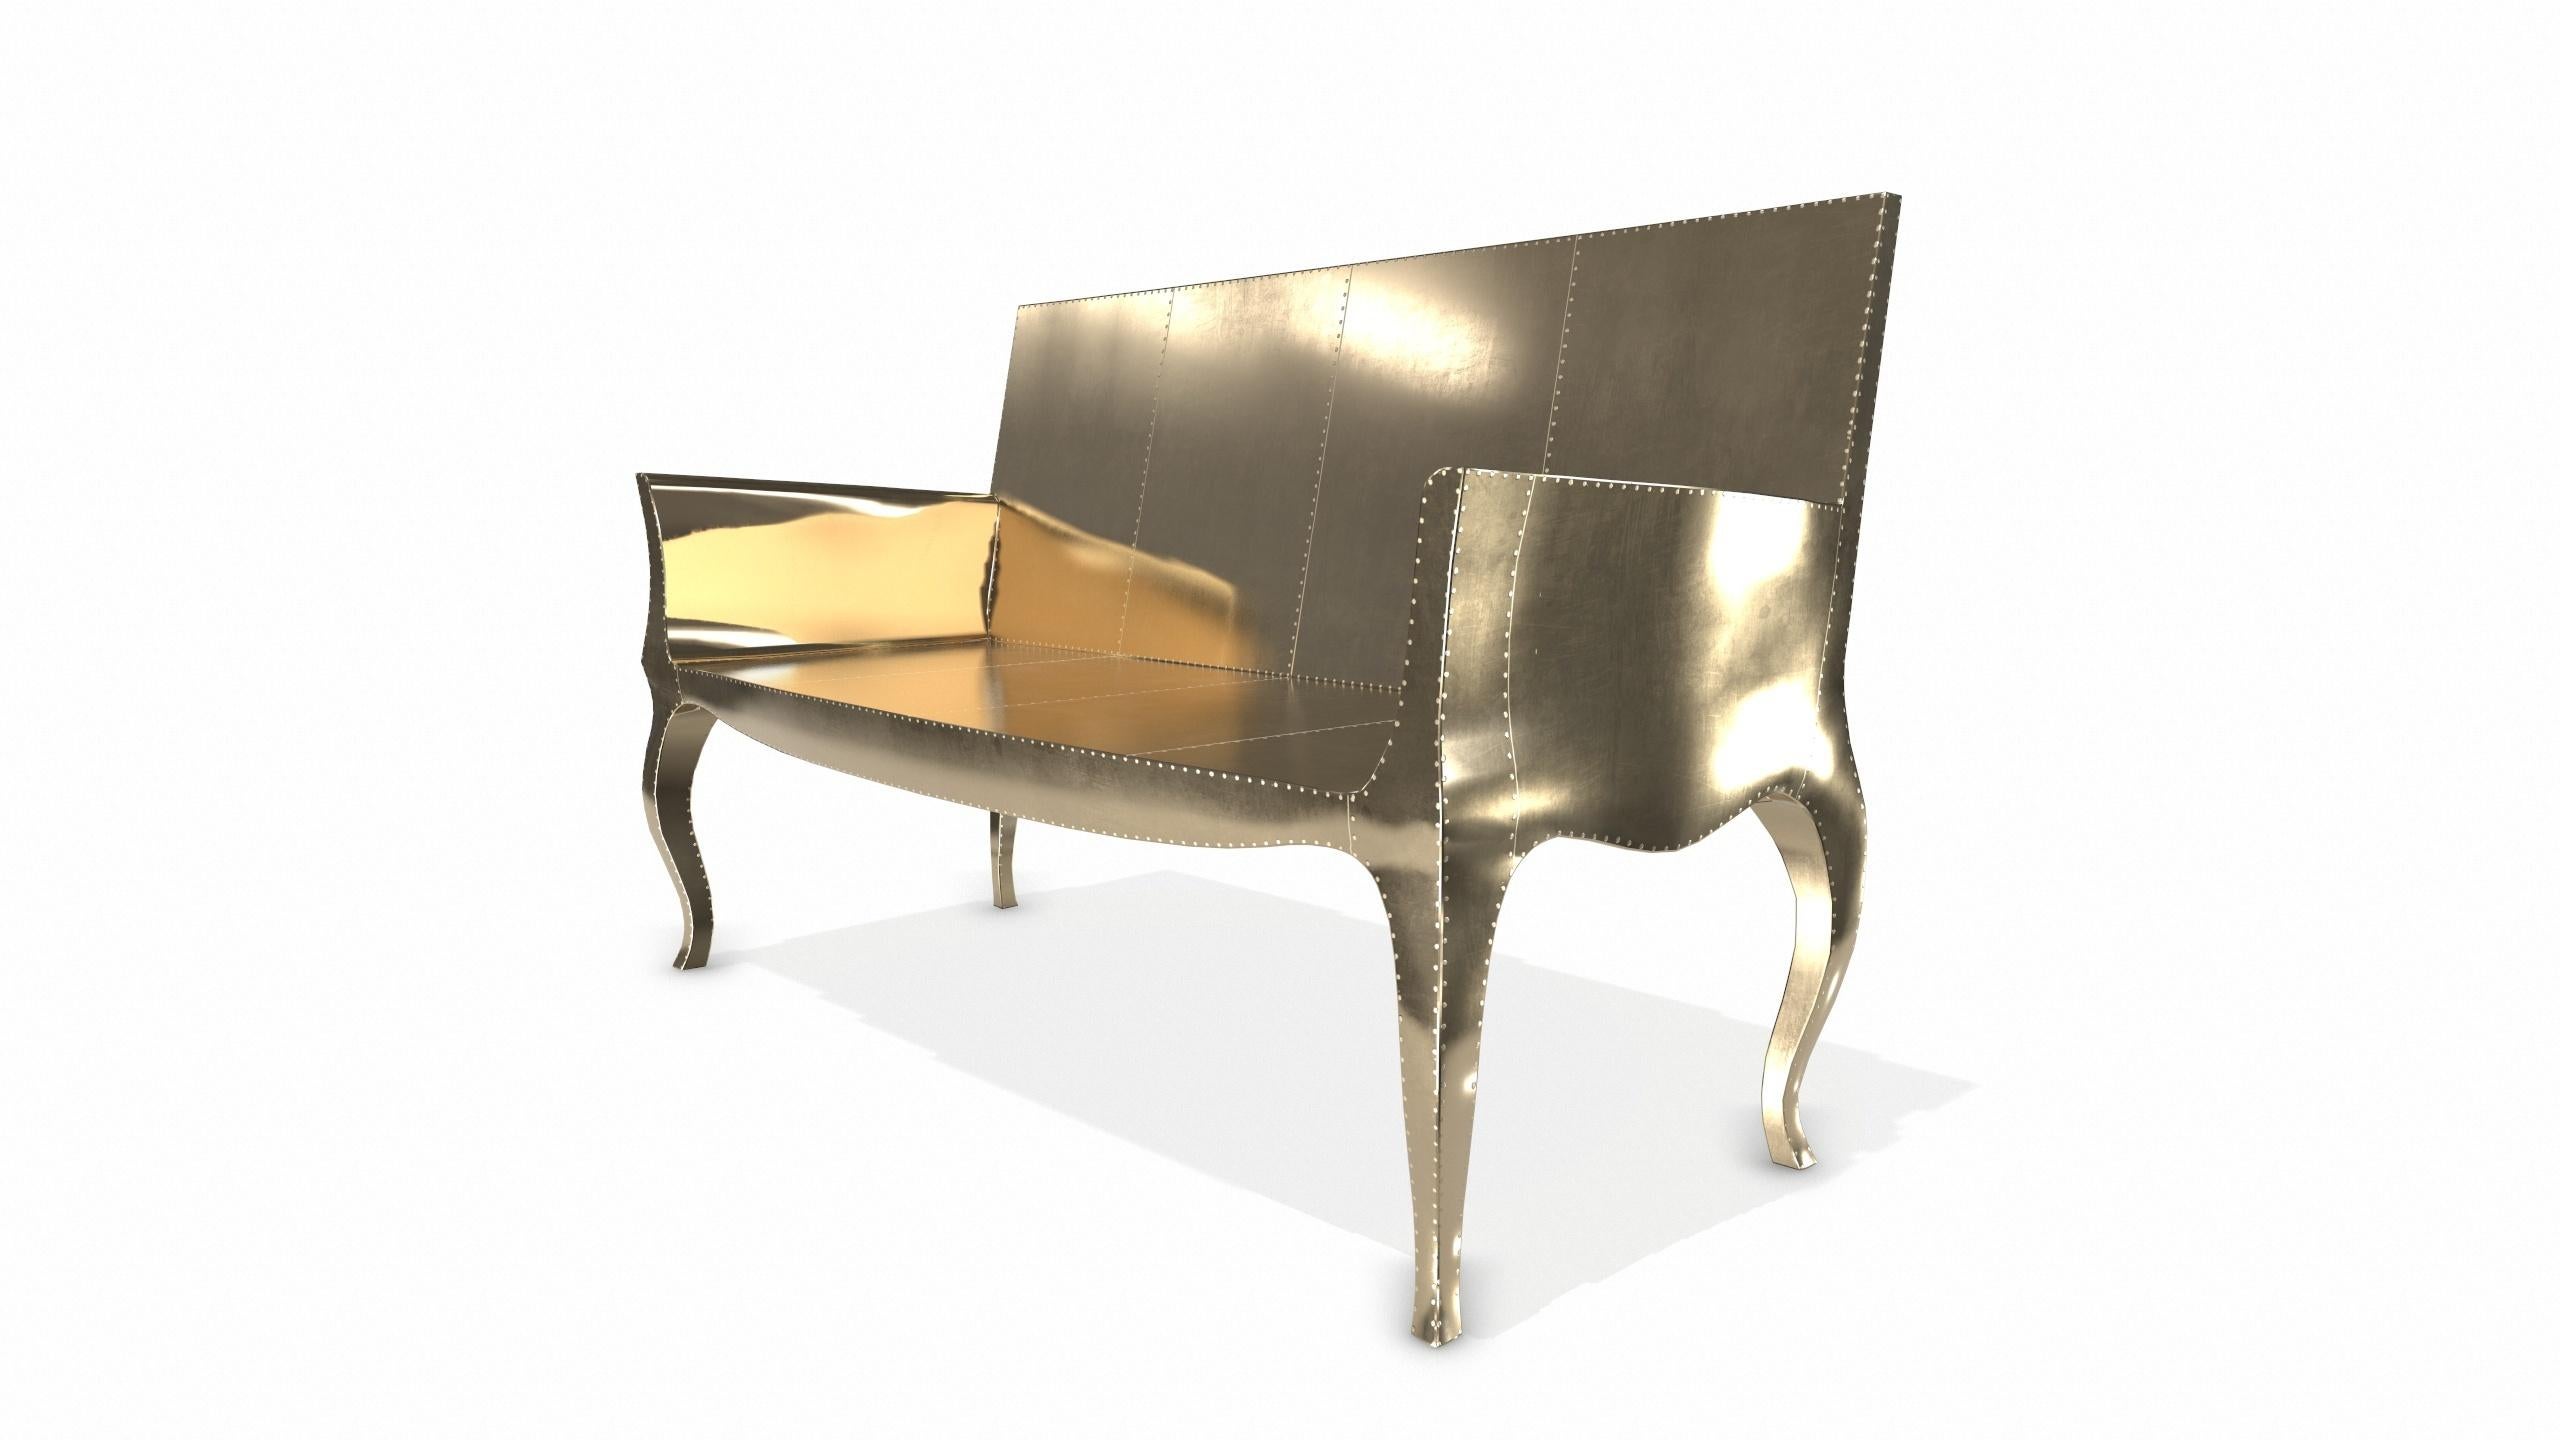 Hand-Crafted Louise Settee Art Deco Lounge Chairs in Smooth Brass by Paul Mathieu For Sale